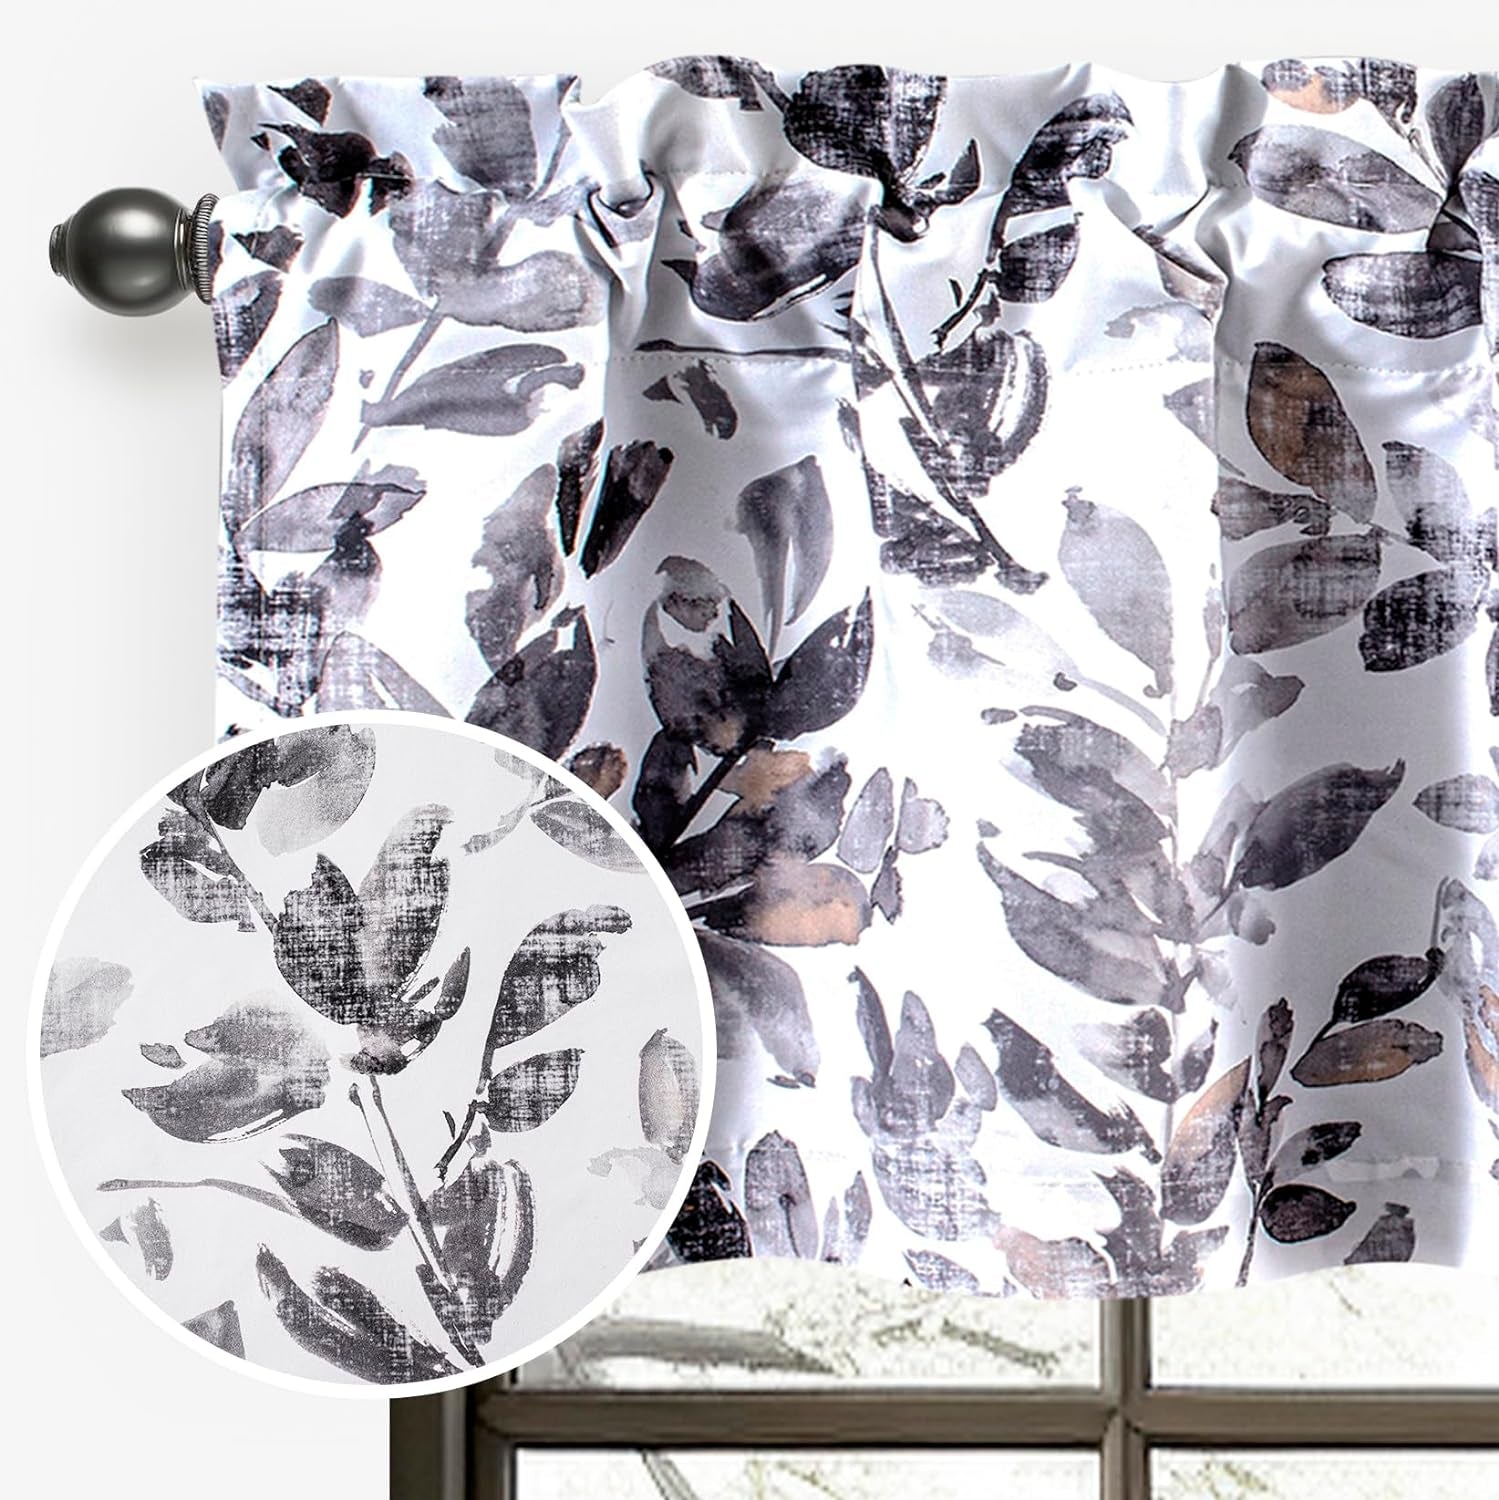 Driftaway Jolie Branches Leaves Botanical Printed Blackout Thermal Insulated Window Curtain Valance Rod Pocket 52 Inch by 18 Inch plus 2 Inch Header Natural